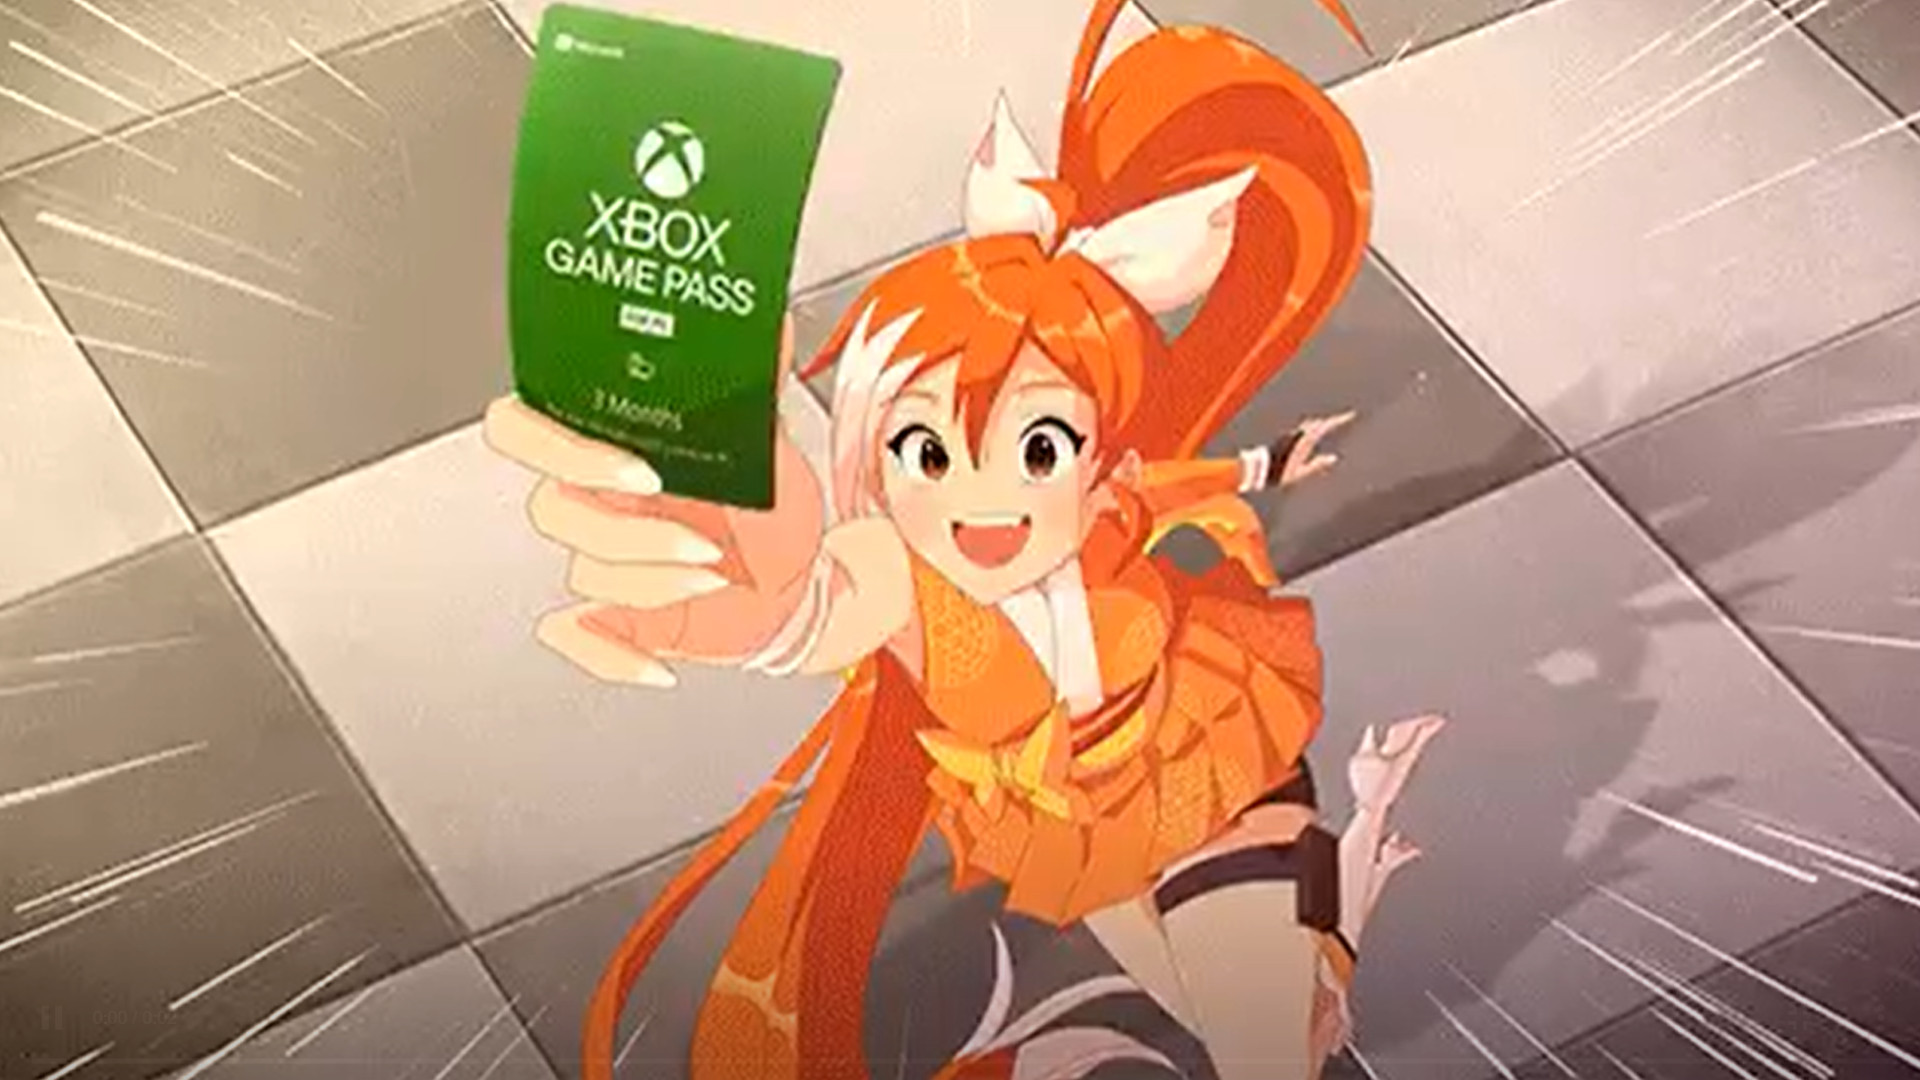 Watch anime, get Game Pass PC for free